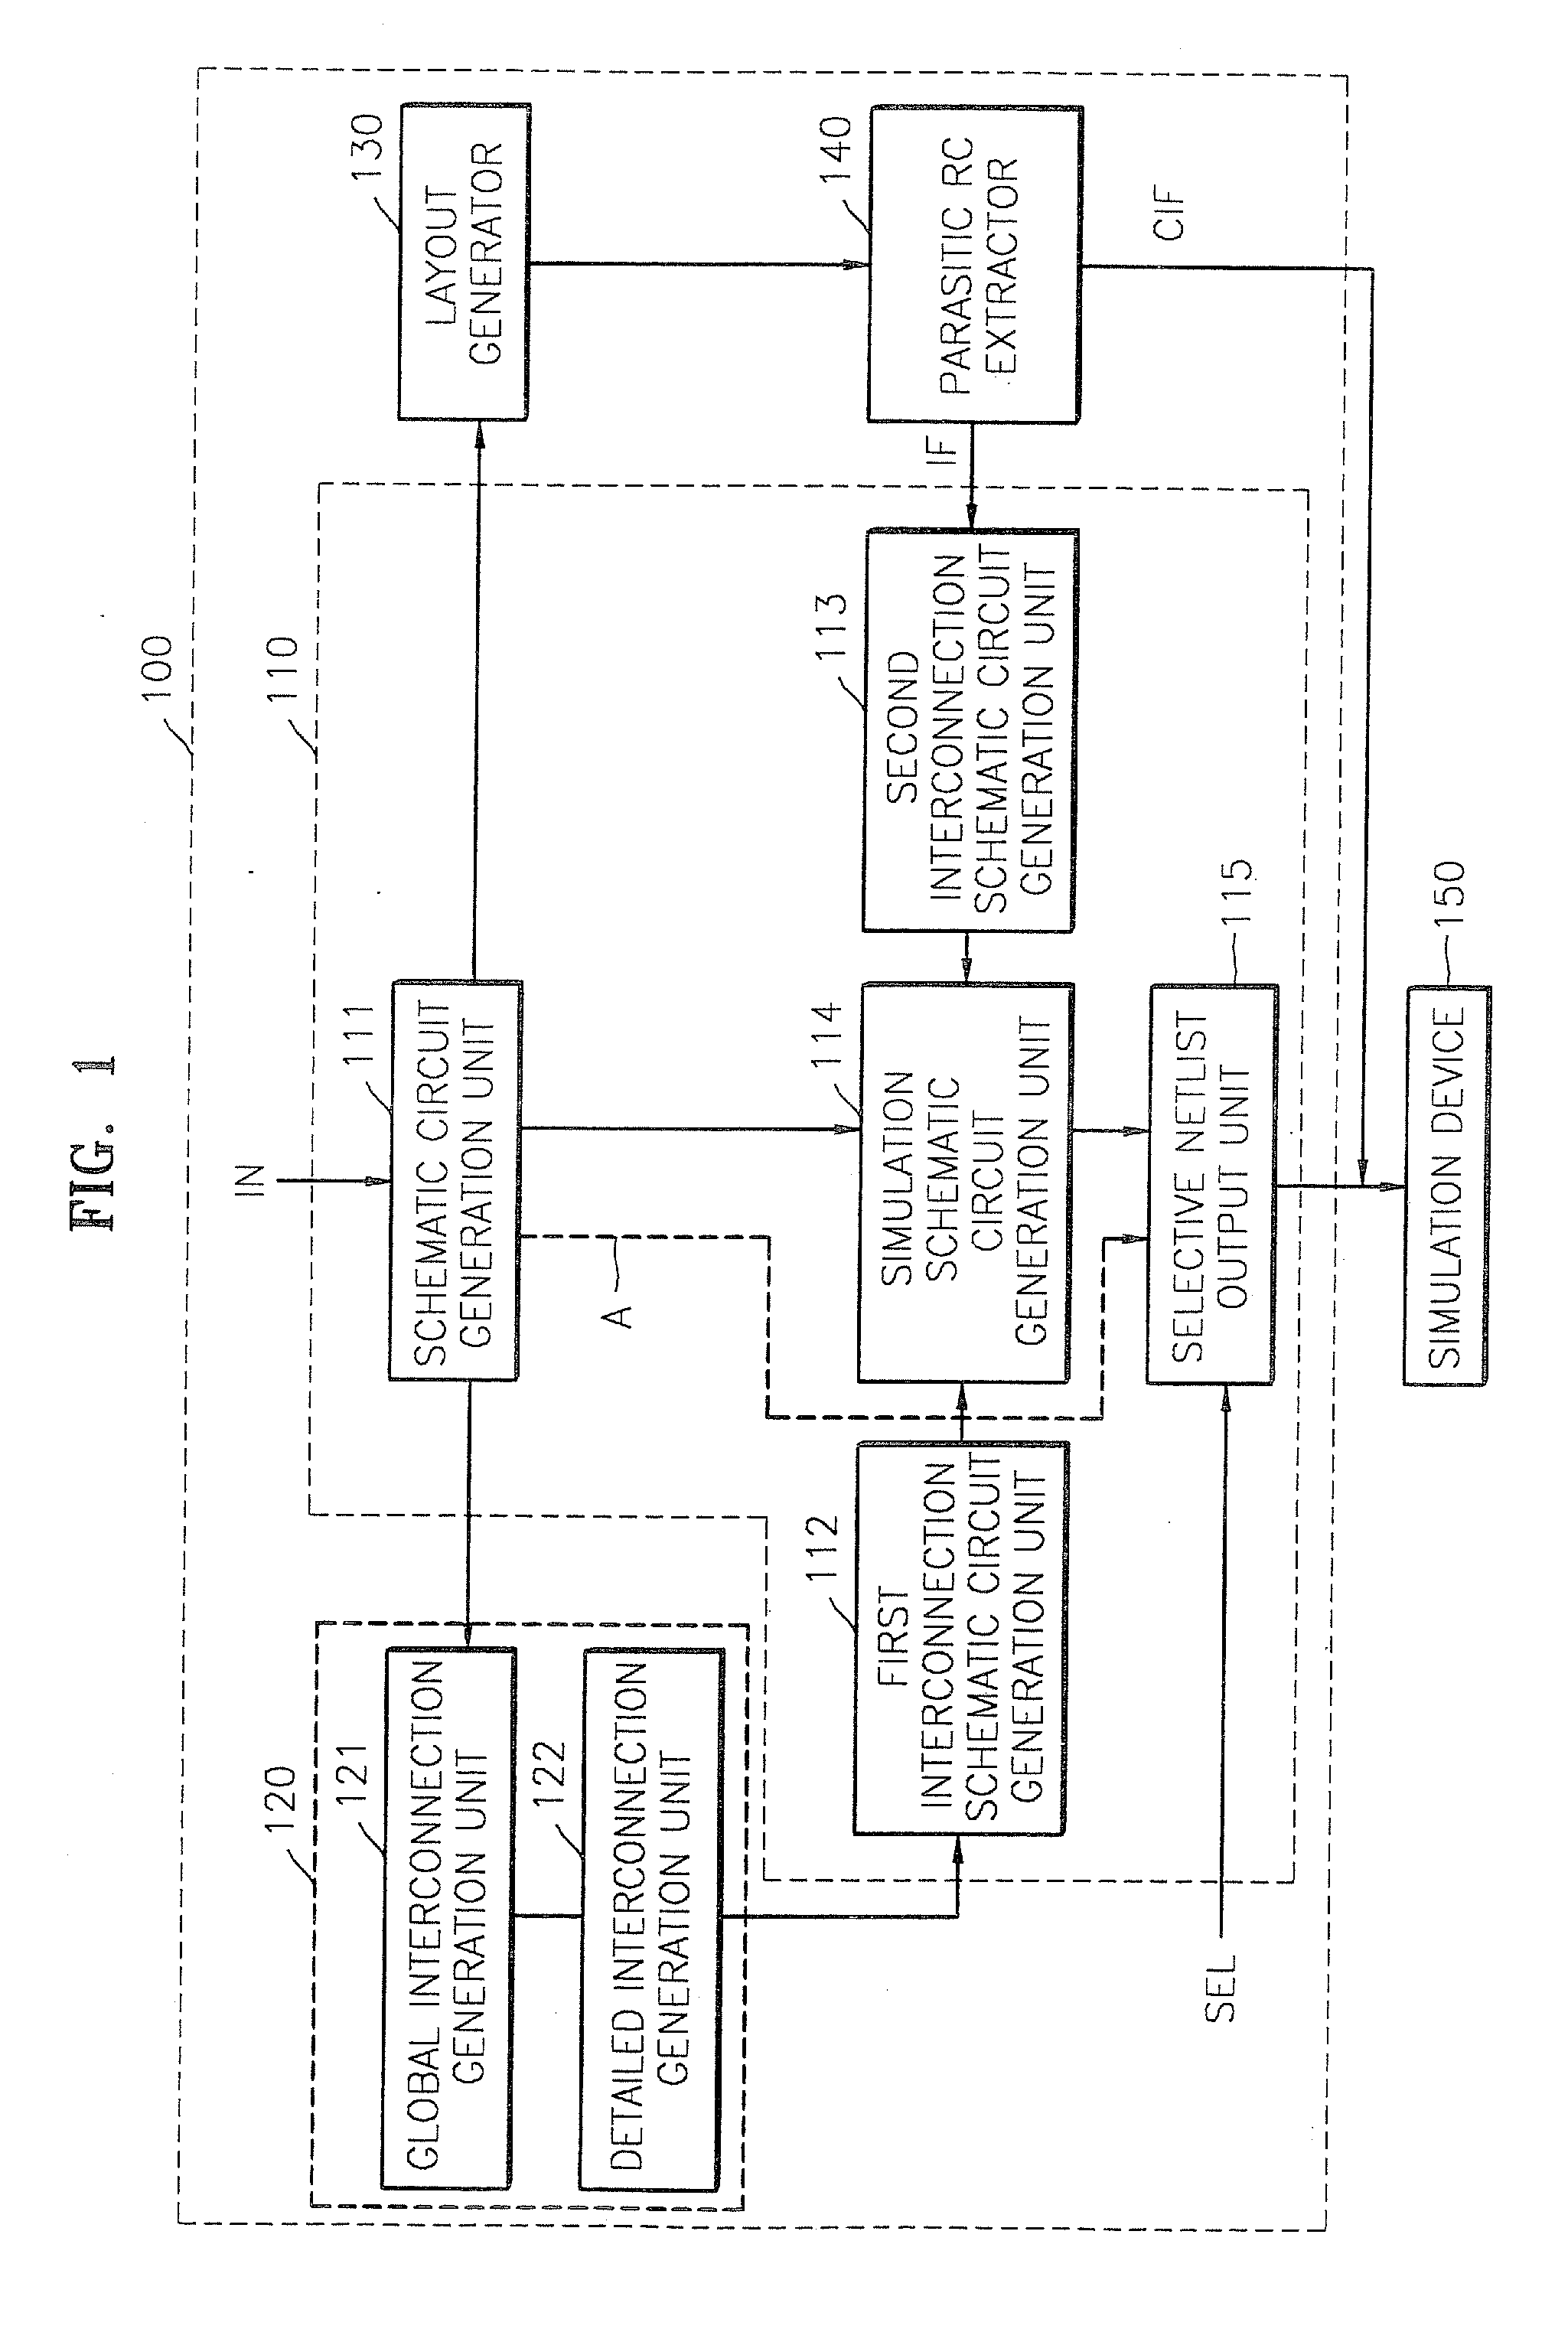 Methods, Apparatus and Computer Program Products for Generating Selective Netlists that Include Interconnection Influences at Pre-Layout and Post-Layout Design Stages